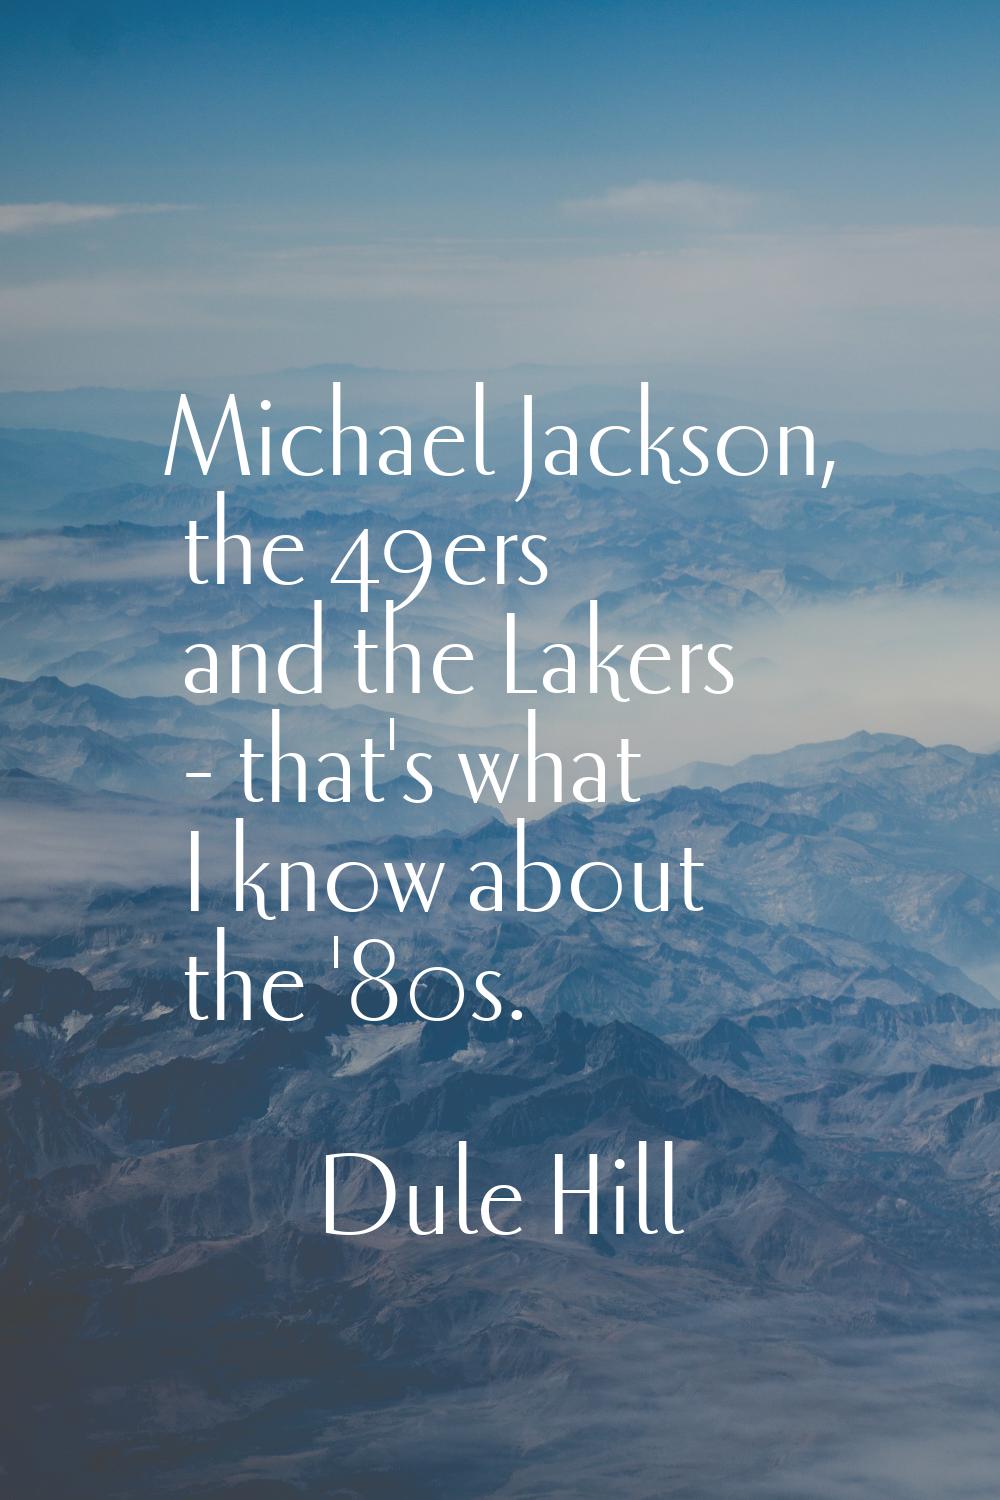 Michael Jackson, the 49ers and the Lakers - that's what I know about the '80s.